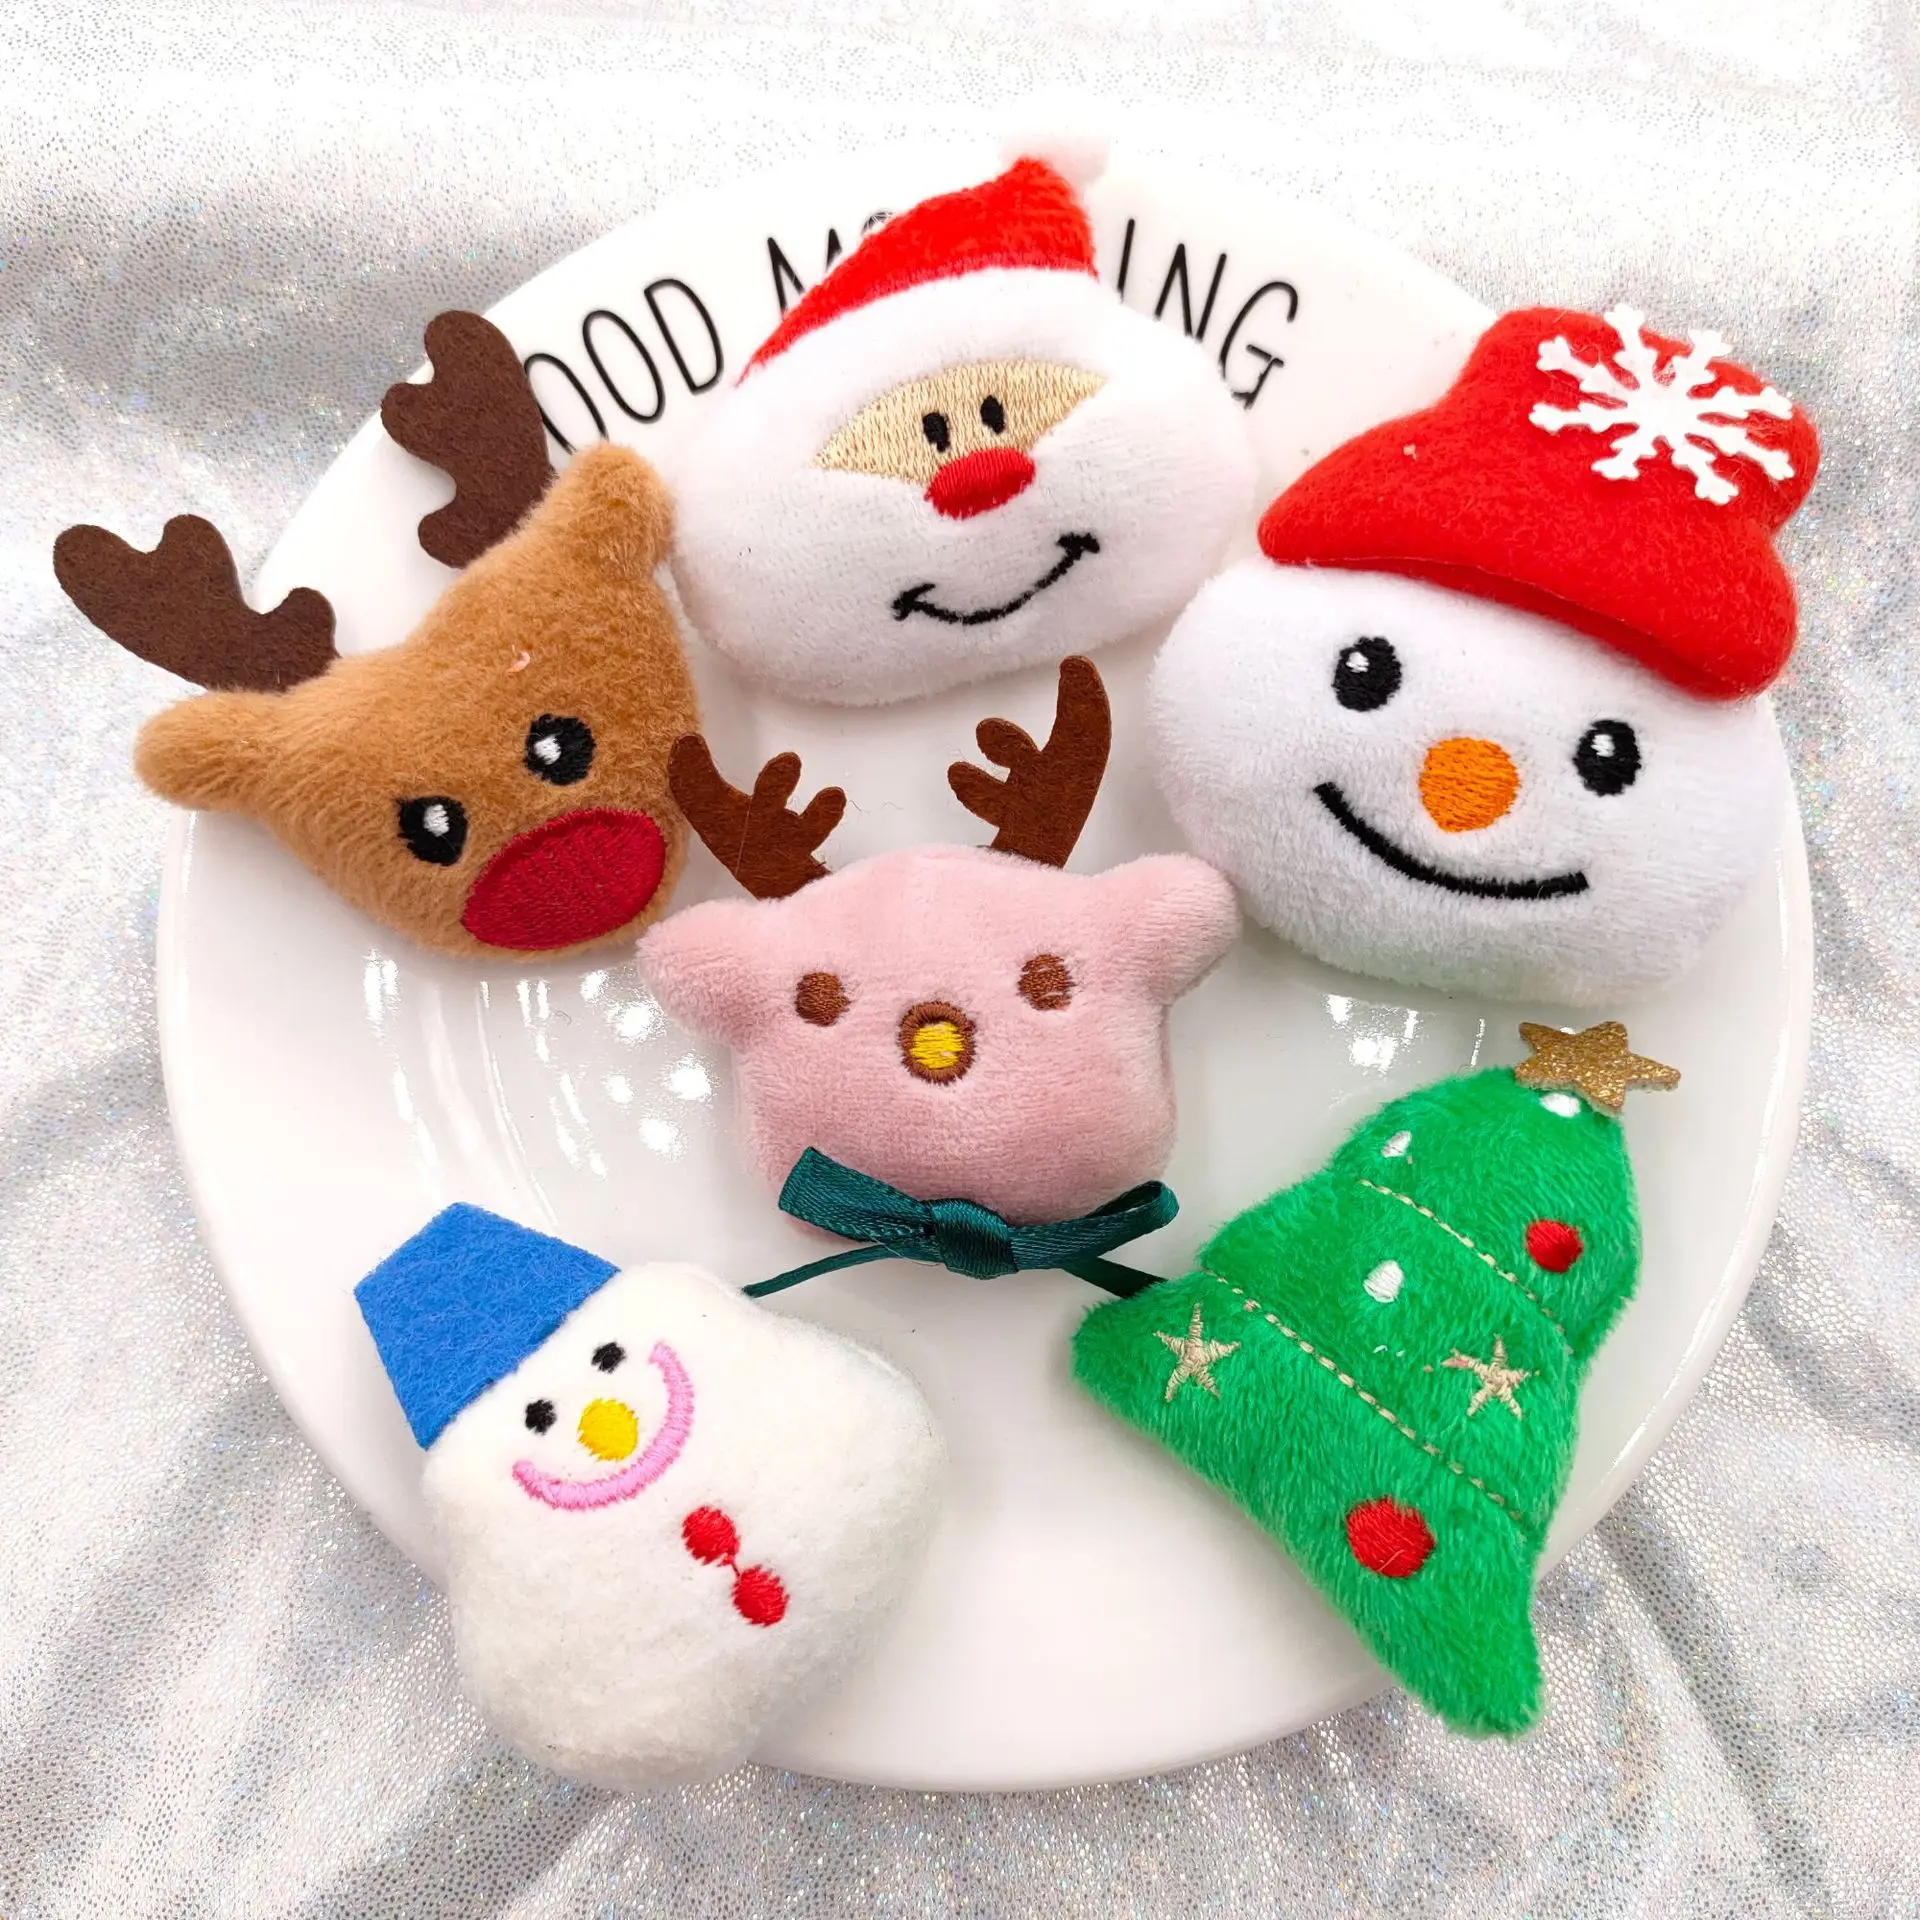 Christmas Theme Catnip Toys, Cat Treat Toys With Real Catnip Fillings, Discount Valid Till 2 Months Before Christmas best dog toys